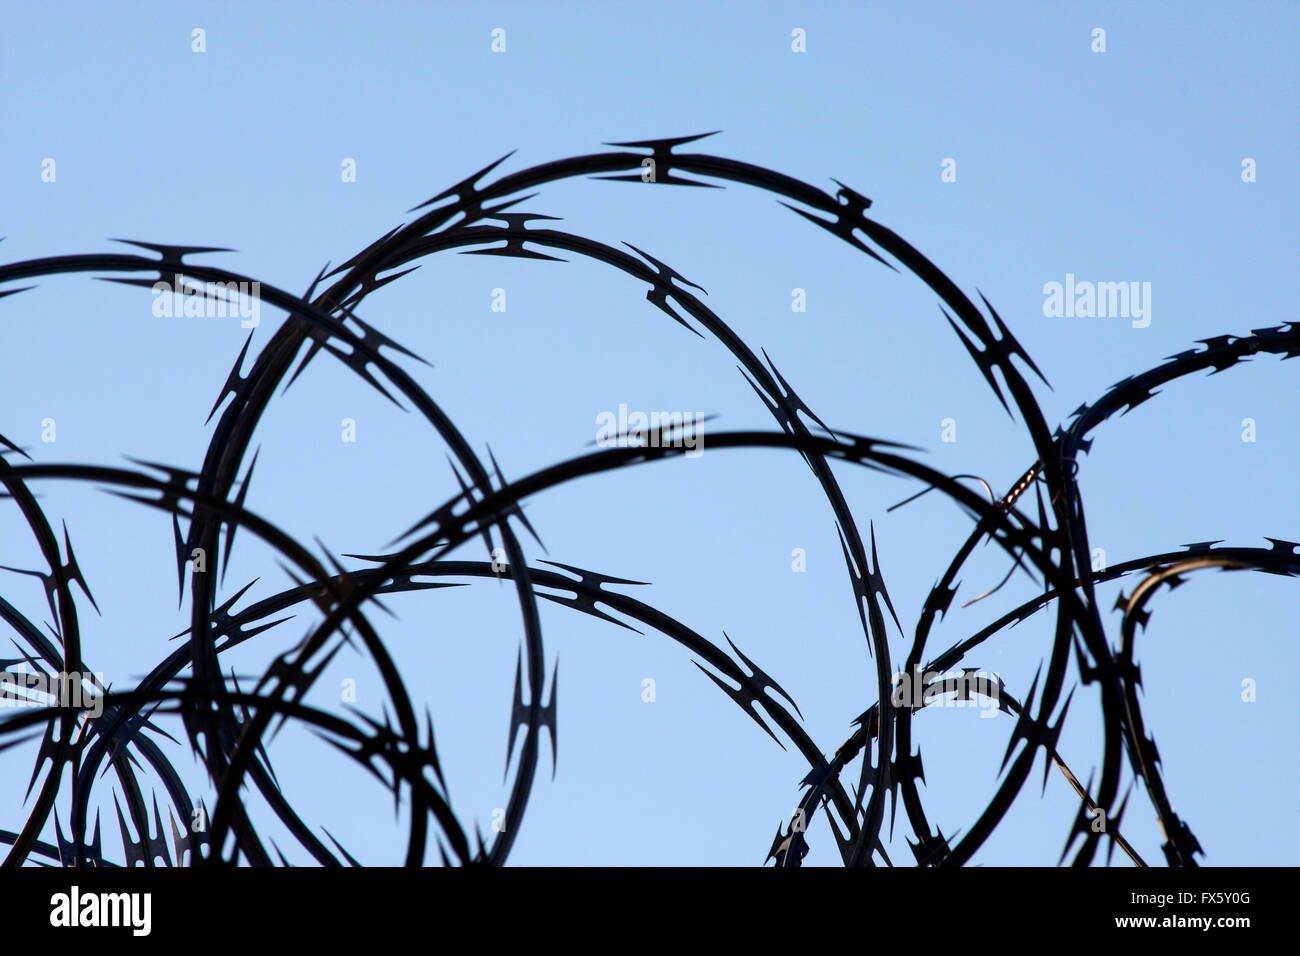 Razor wire silhouetted against a light blue sky Stock Photo